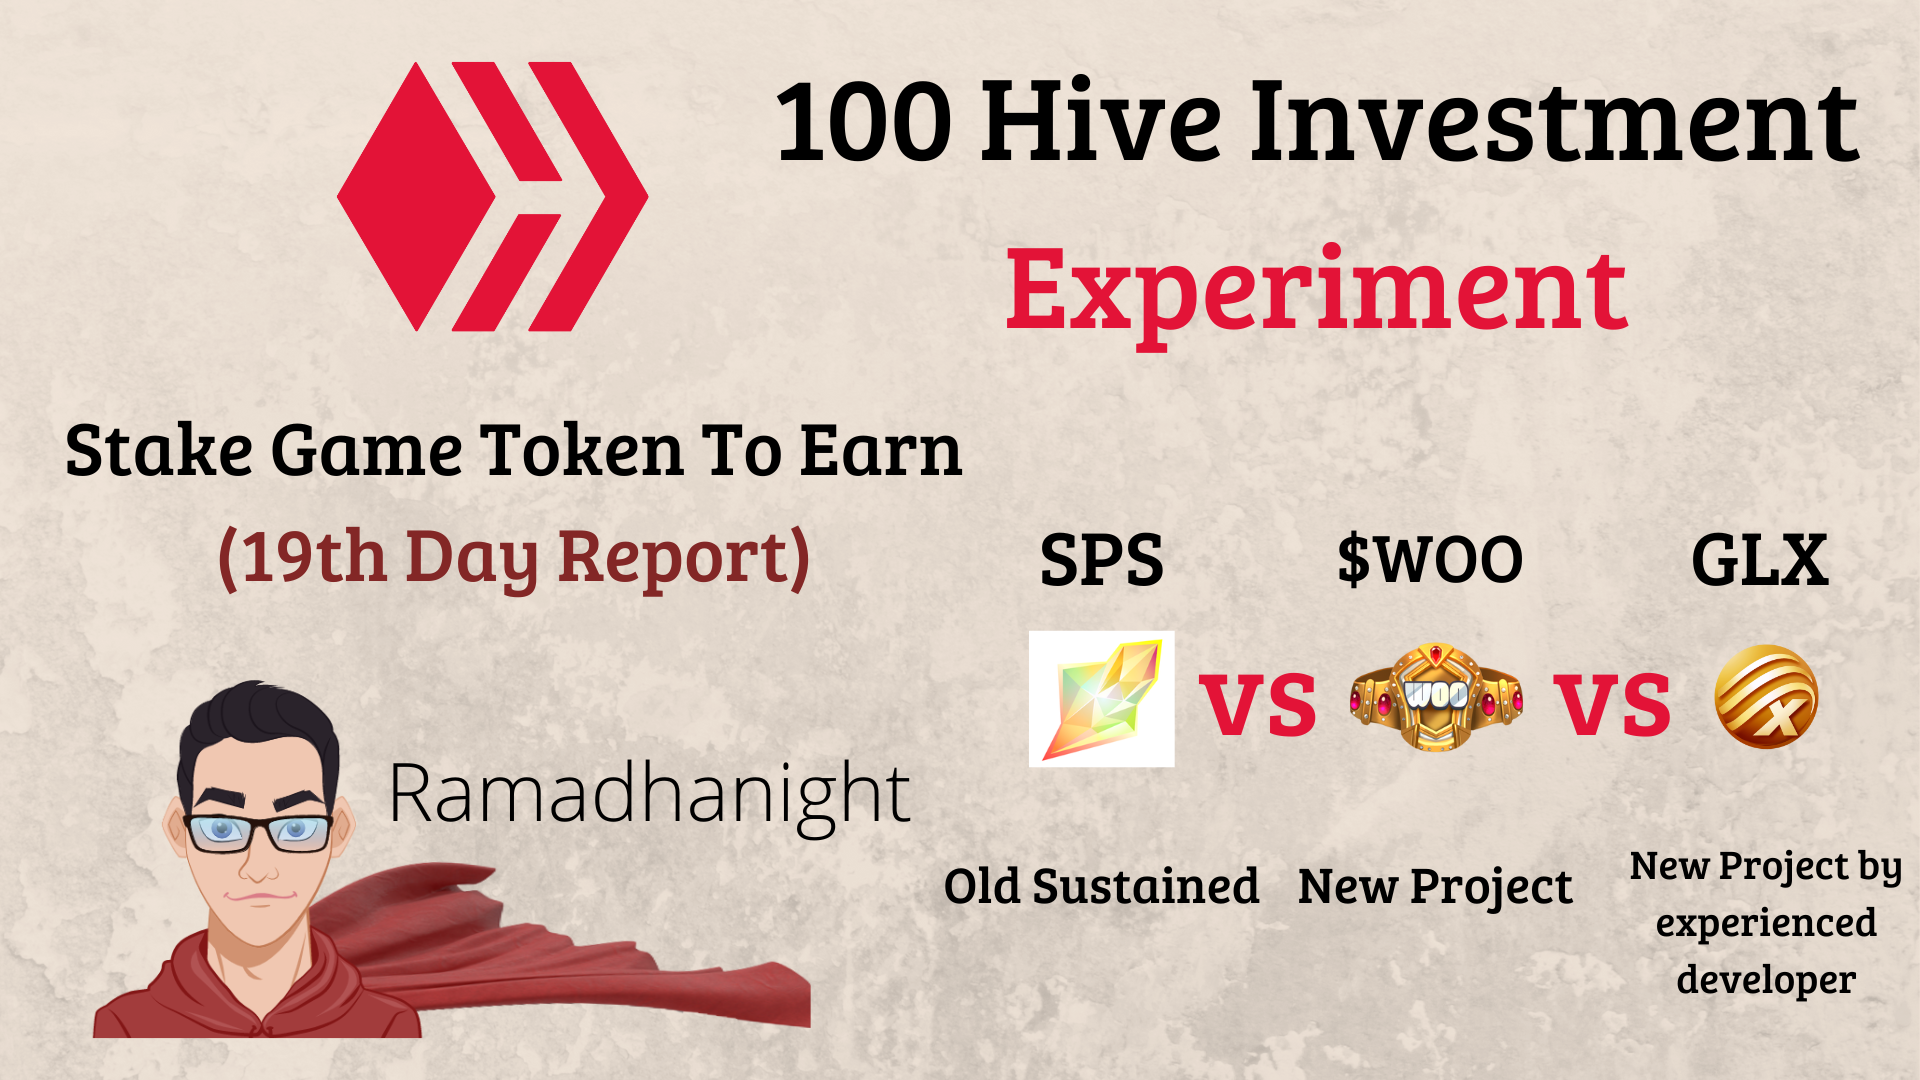 @ramadhanight/100-hive-experiment-staking-game-coin-or-19th-day-report-some-declining-apr